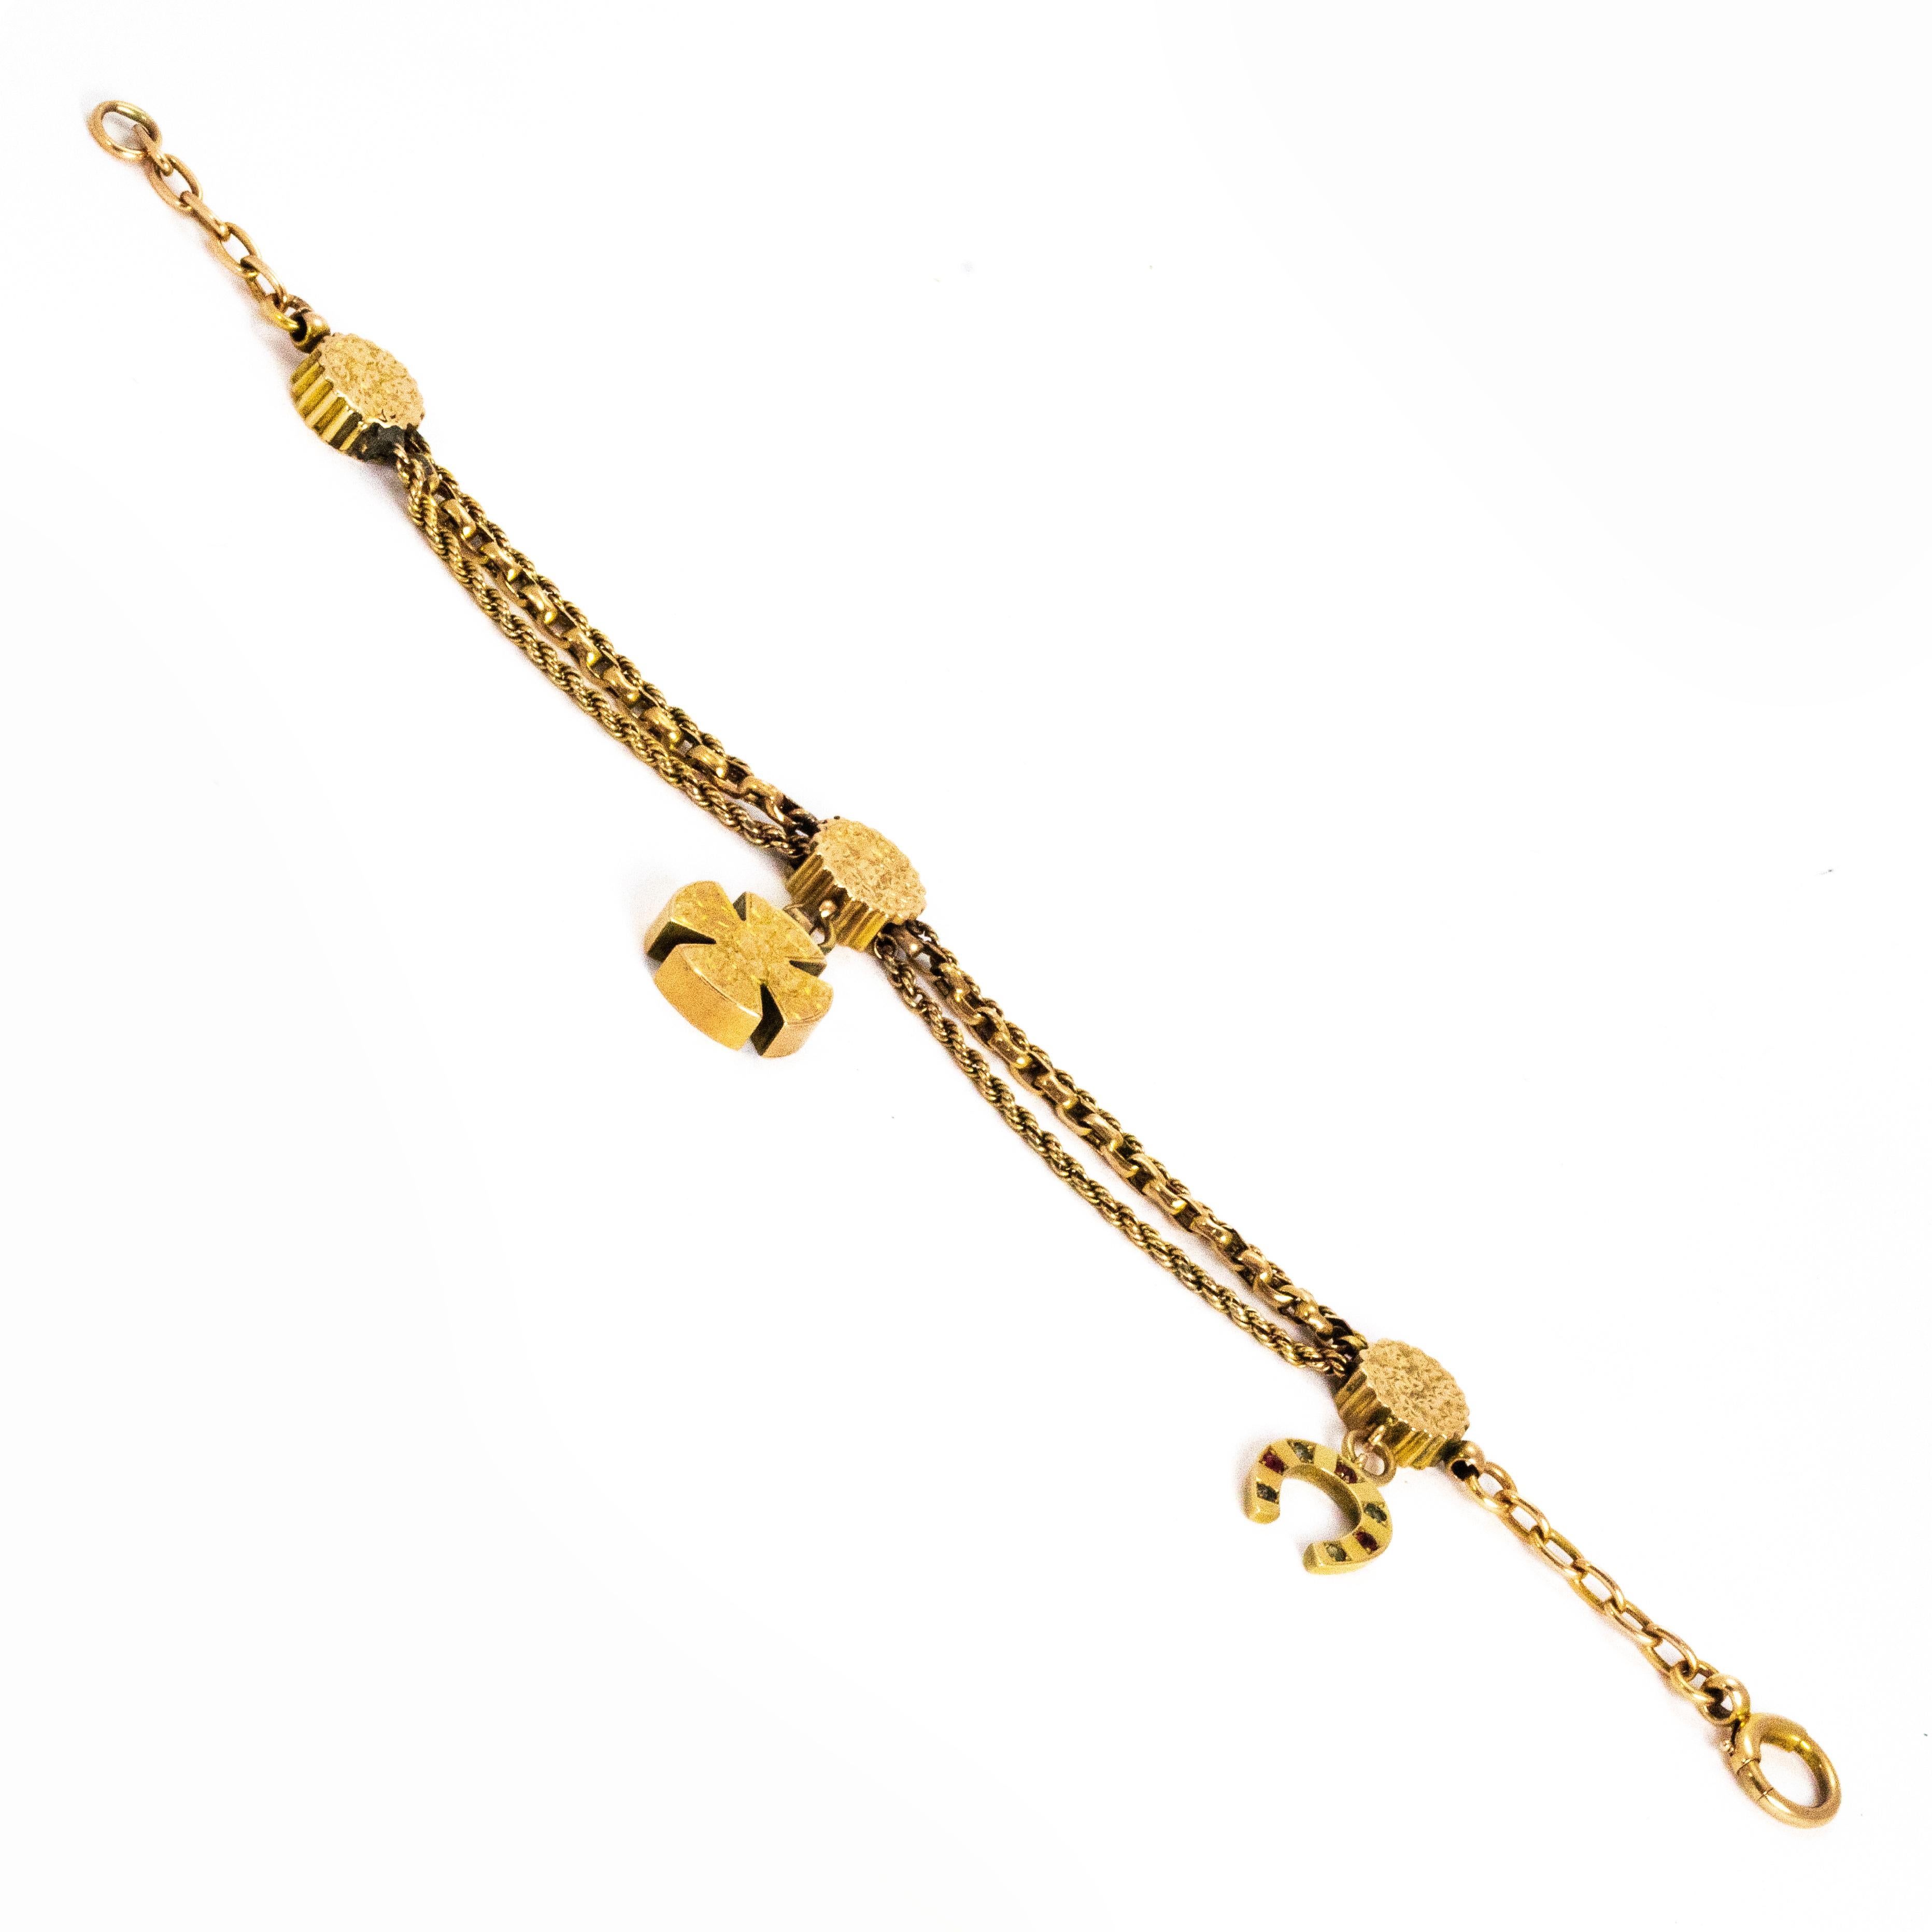 A wonderful antique Victorian Albertina bracelet. Set with a horse shoe charm inlaid with red and green stones, and an ornately detailed Maltese cross. Modelled in 9 carat yellow gold.

Length: 20cm